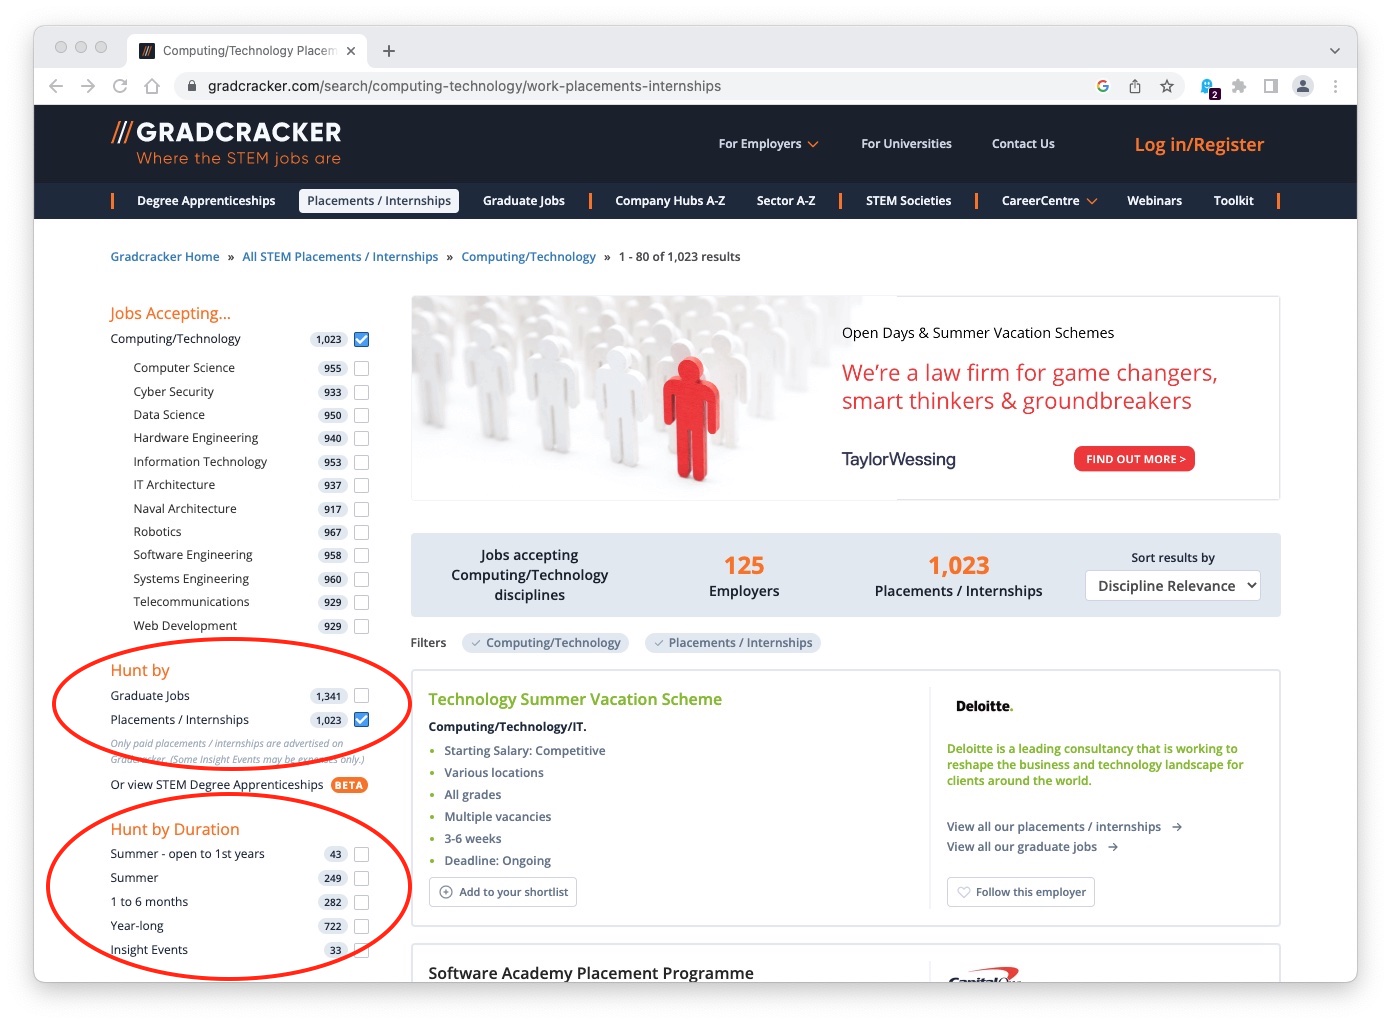 Gradcracker.com allows you to search for opportunities in Computing at gradcracker.com/search/computing-technology/jobs shown here. You can refine your search for internships, placements and graduate jobs (circled in red) by their duration: Summer (including those open to first year students), 1 to 6 months, Year-long and Insight Events described in section 5.3. You may need to zoom in to see the detail in this figure.